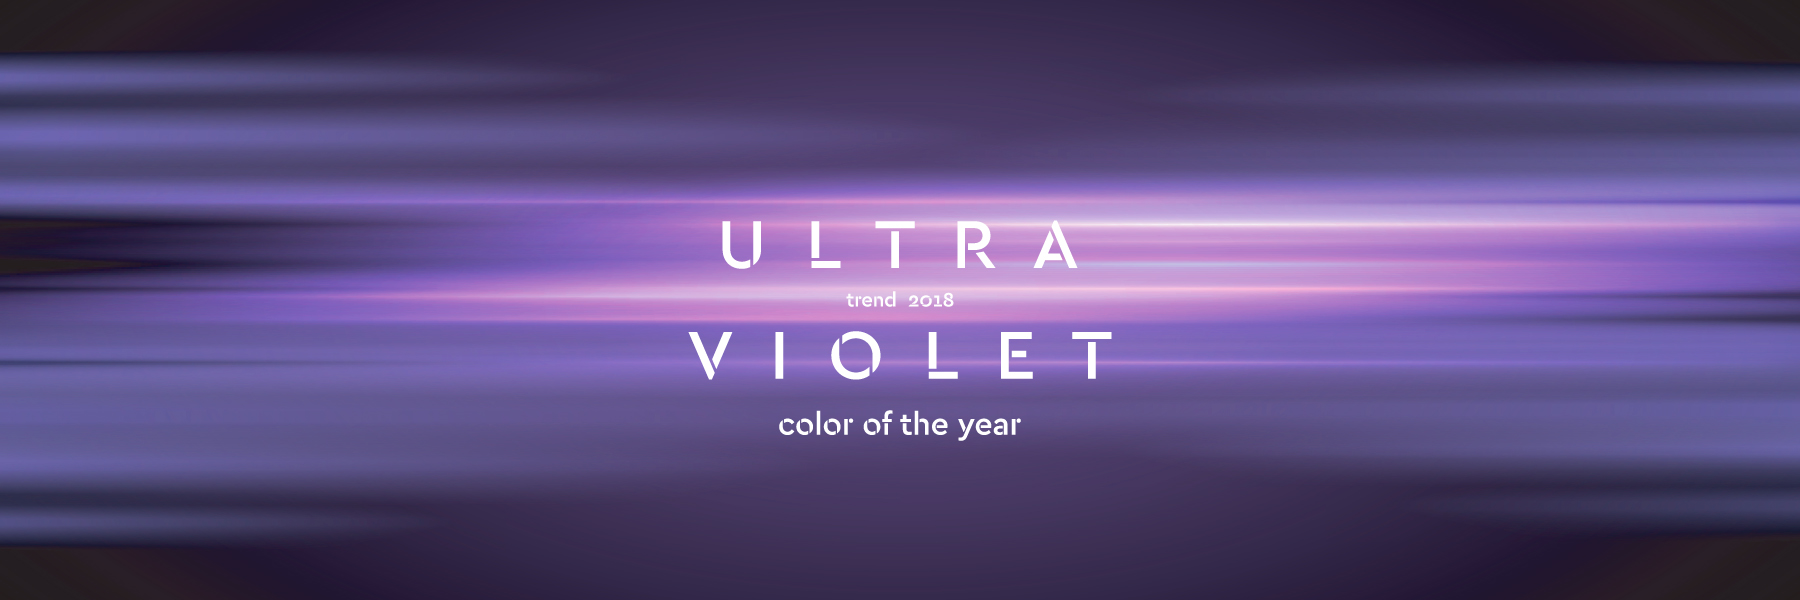 2018-color-of-the-year-ultra-violet